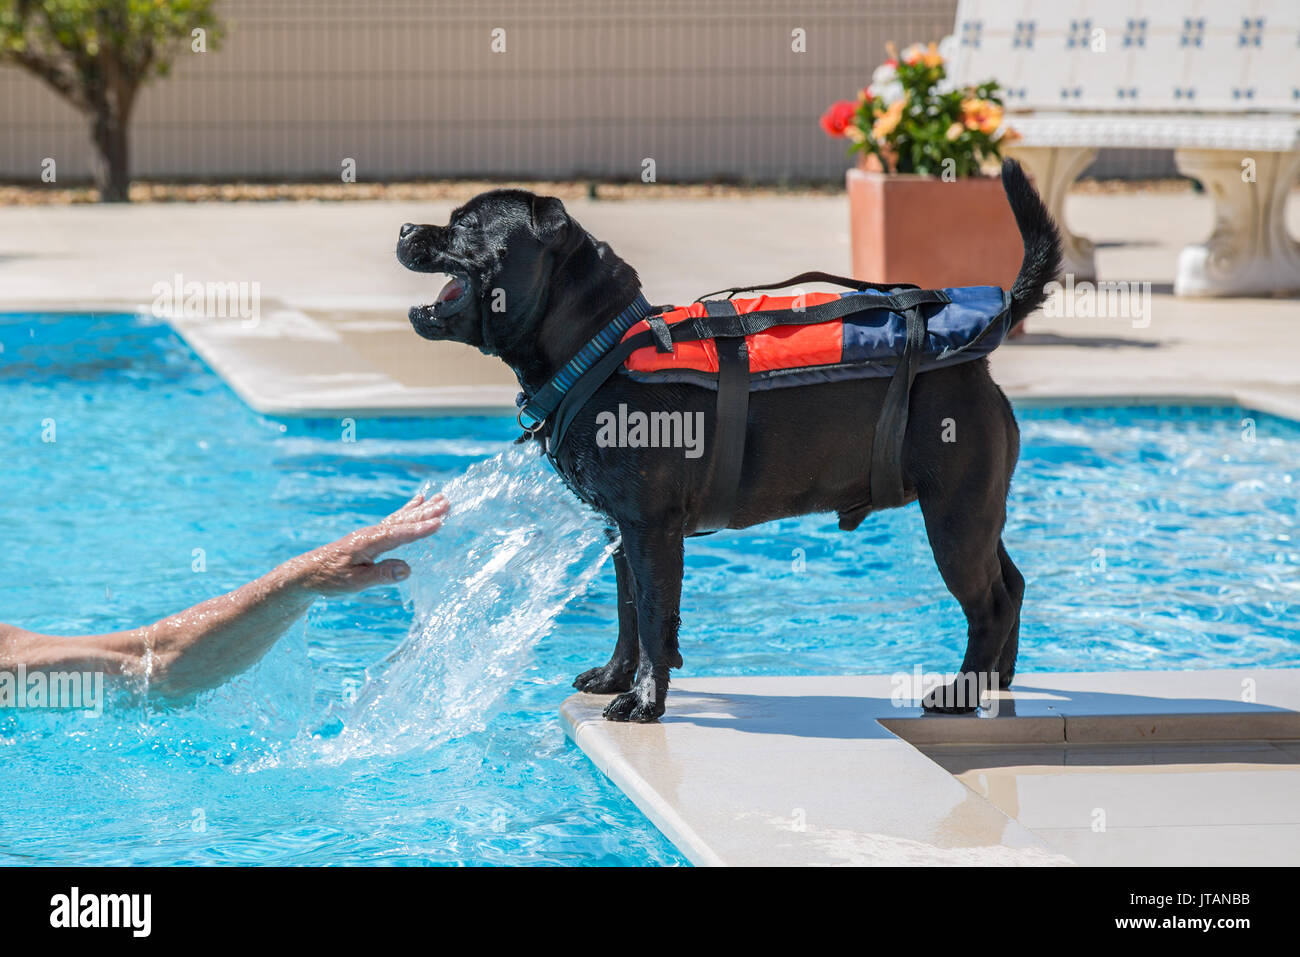 staffordshire bull terrier dog wearing a life jcaket, buoyancy aid by the side of a swimming pool, playing happily and safely. He is being splashed by Stock Photo